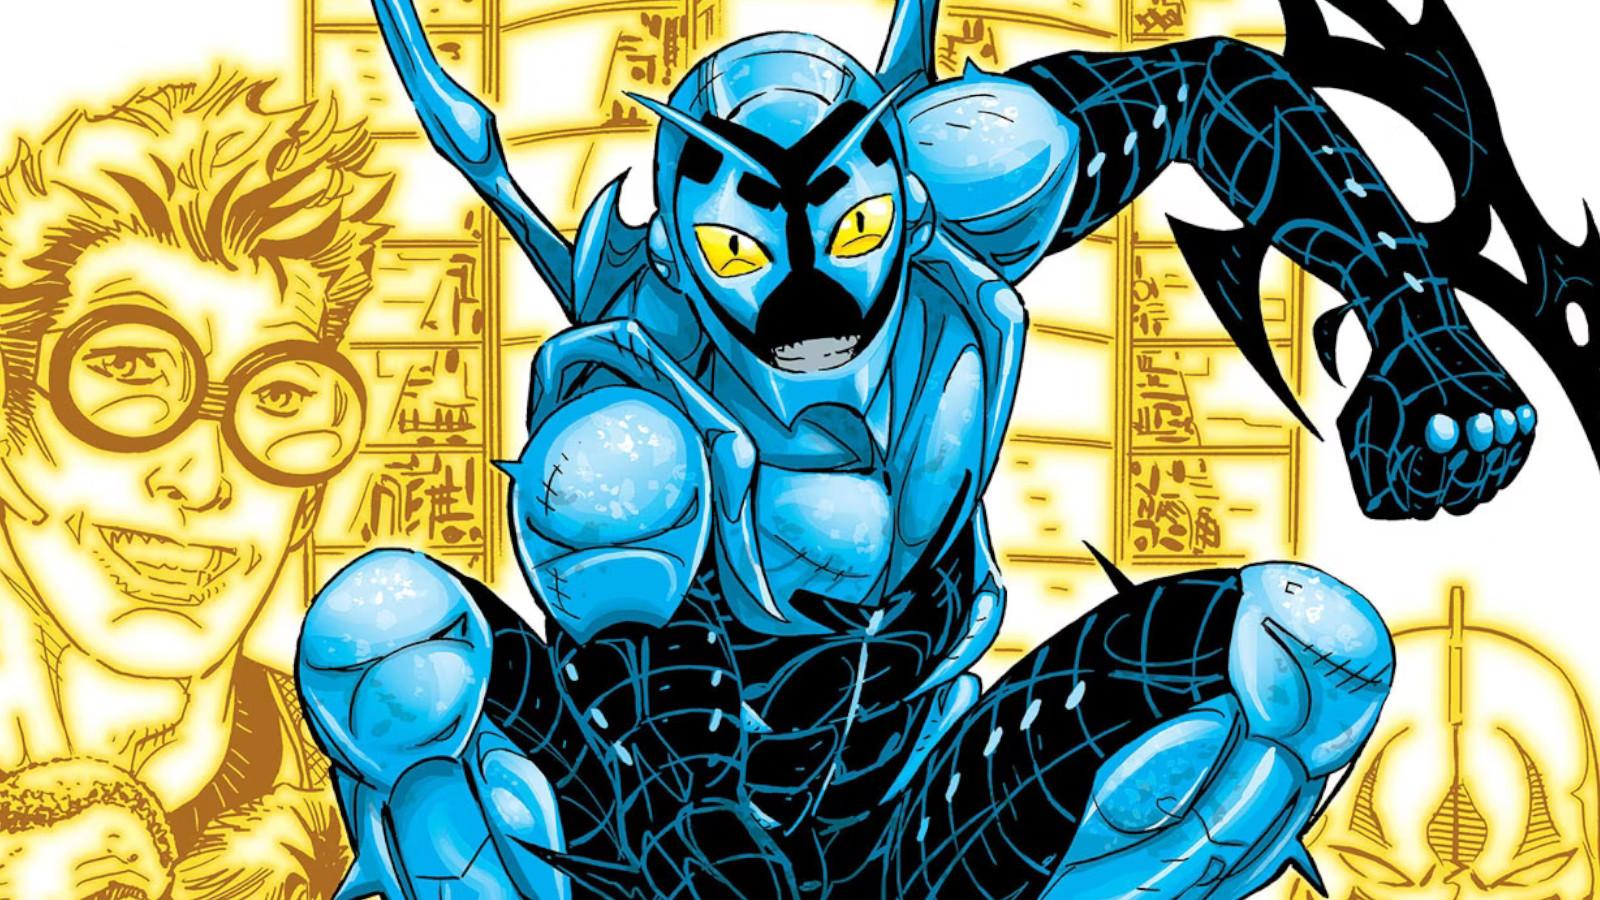 Blue Beetle surrounded by allies.